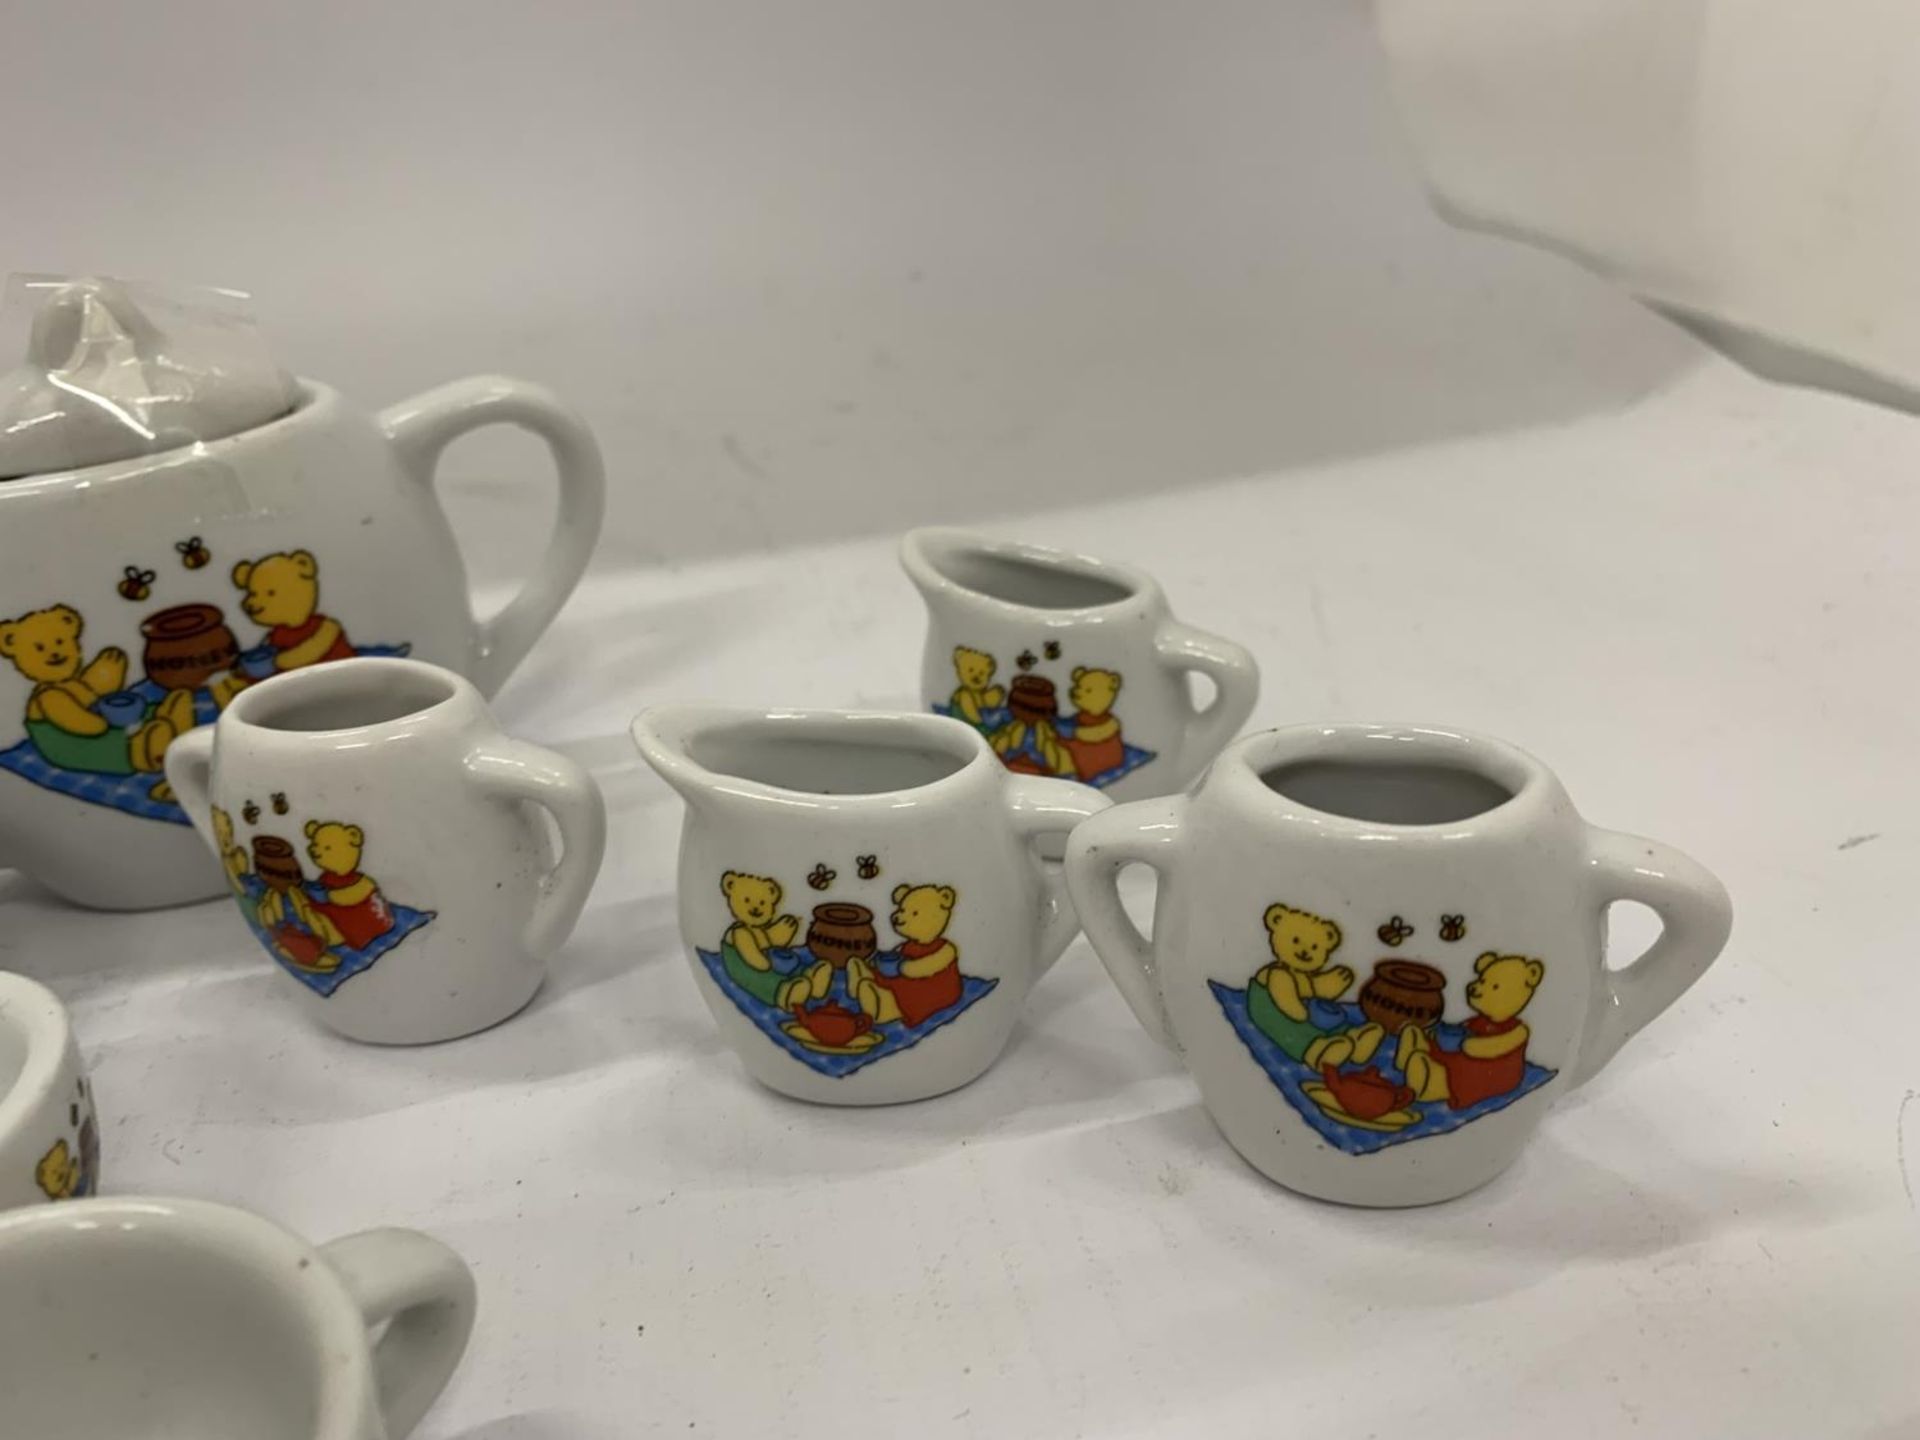 A MINIATURE CHILD'S POTTERY TEASET TO INCLUDE TEAPOT, JUGS, CUPS, ETC WITH A TEDDY BEARS PICNIC - Image 8 of 10